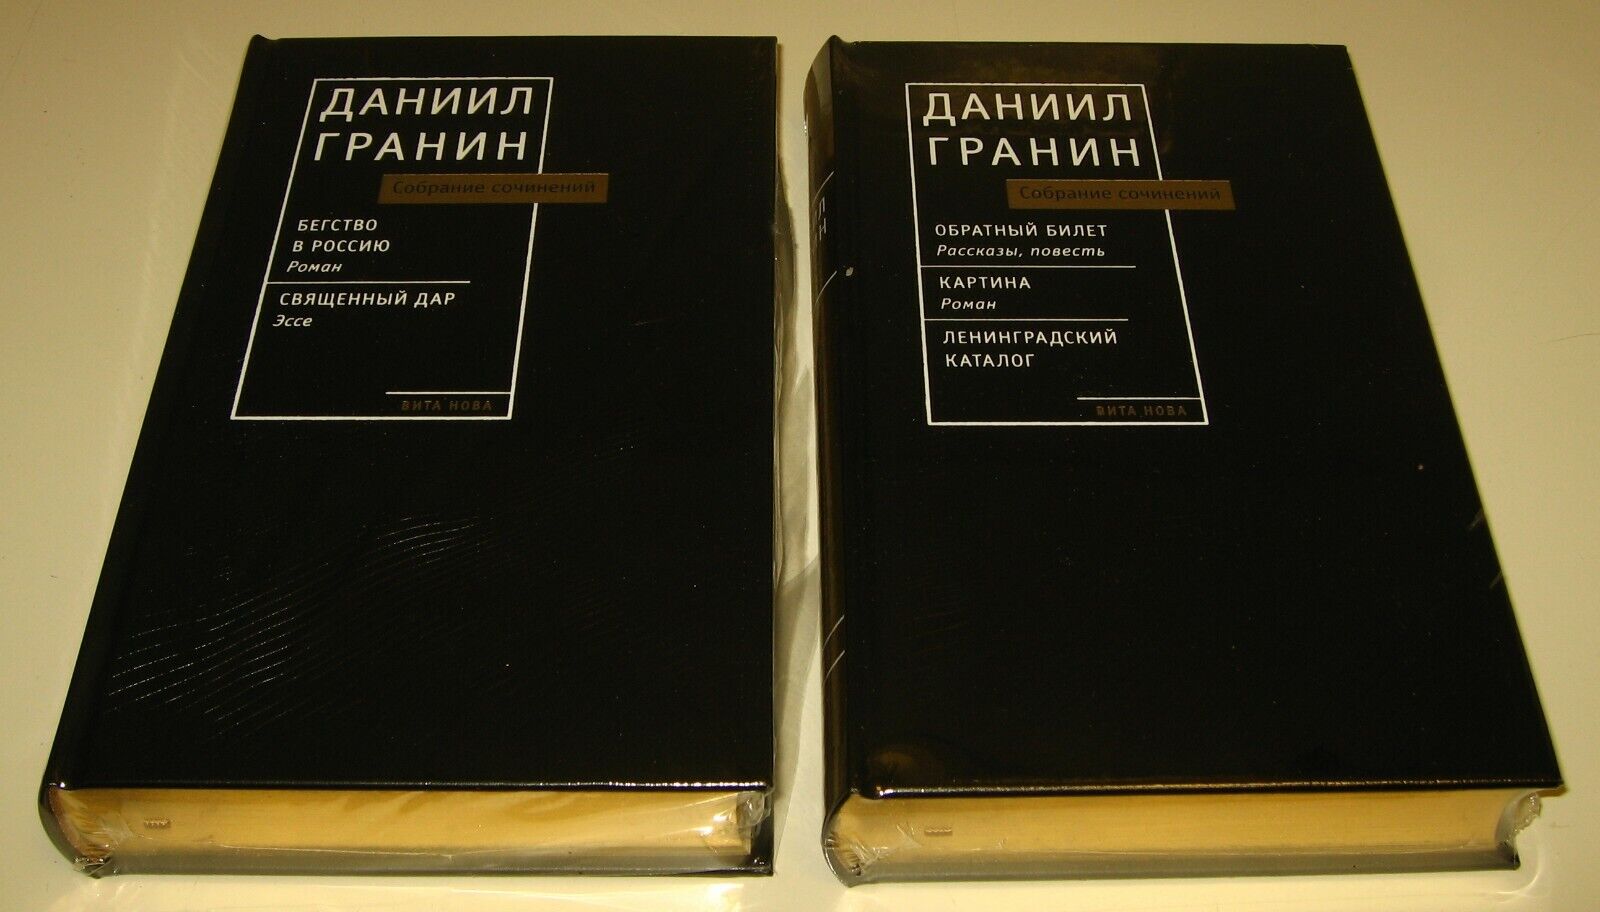 11438.Russian Book: Granin. Collected works 8 volumes. Numbered copy of 90. 2009